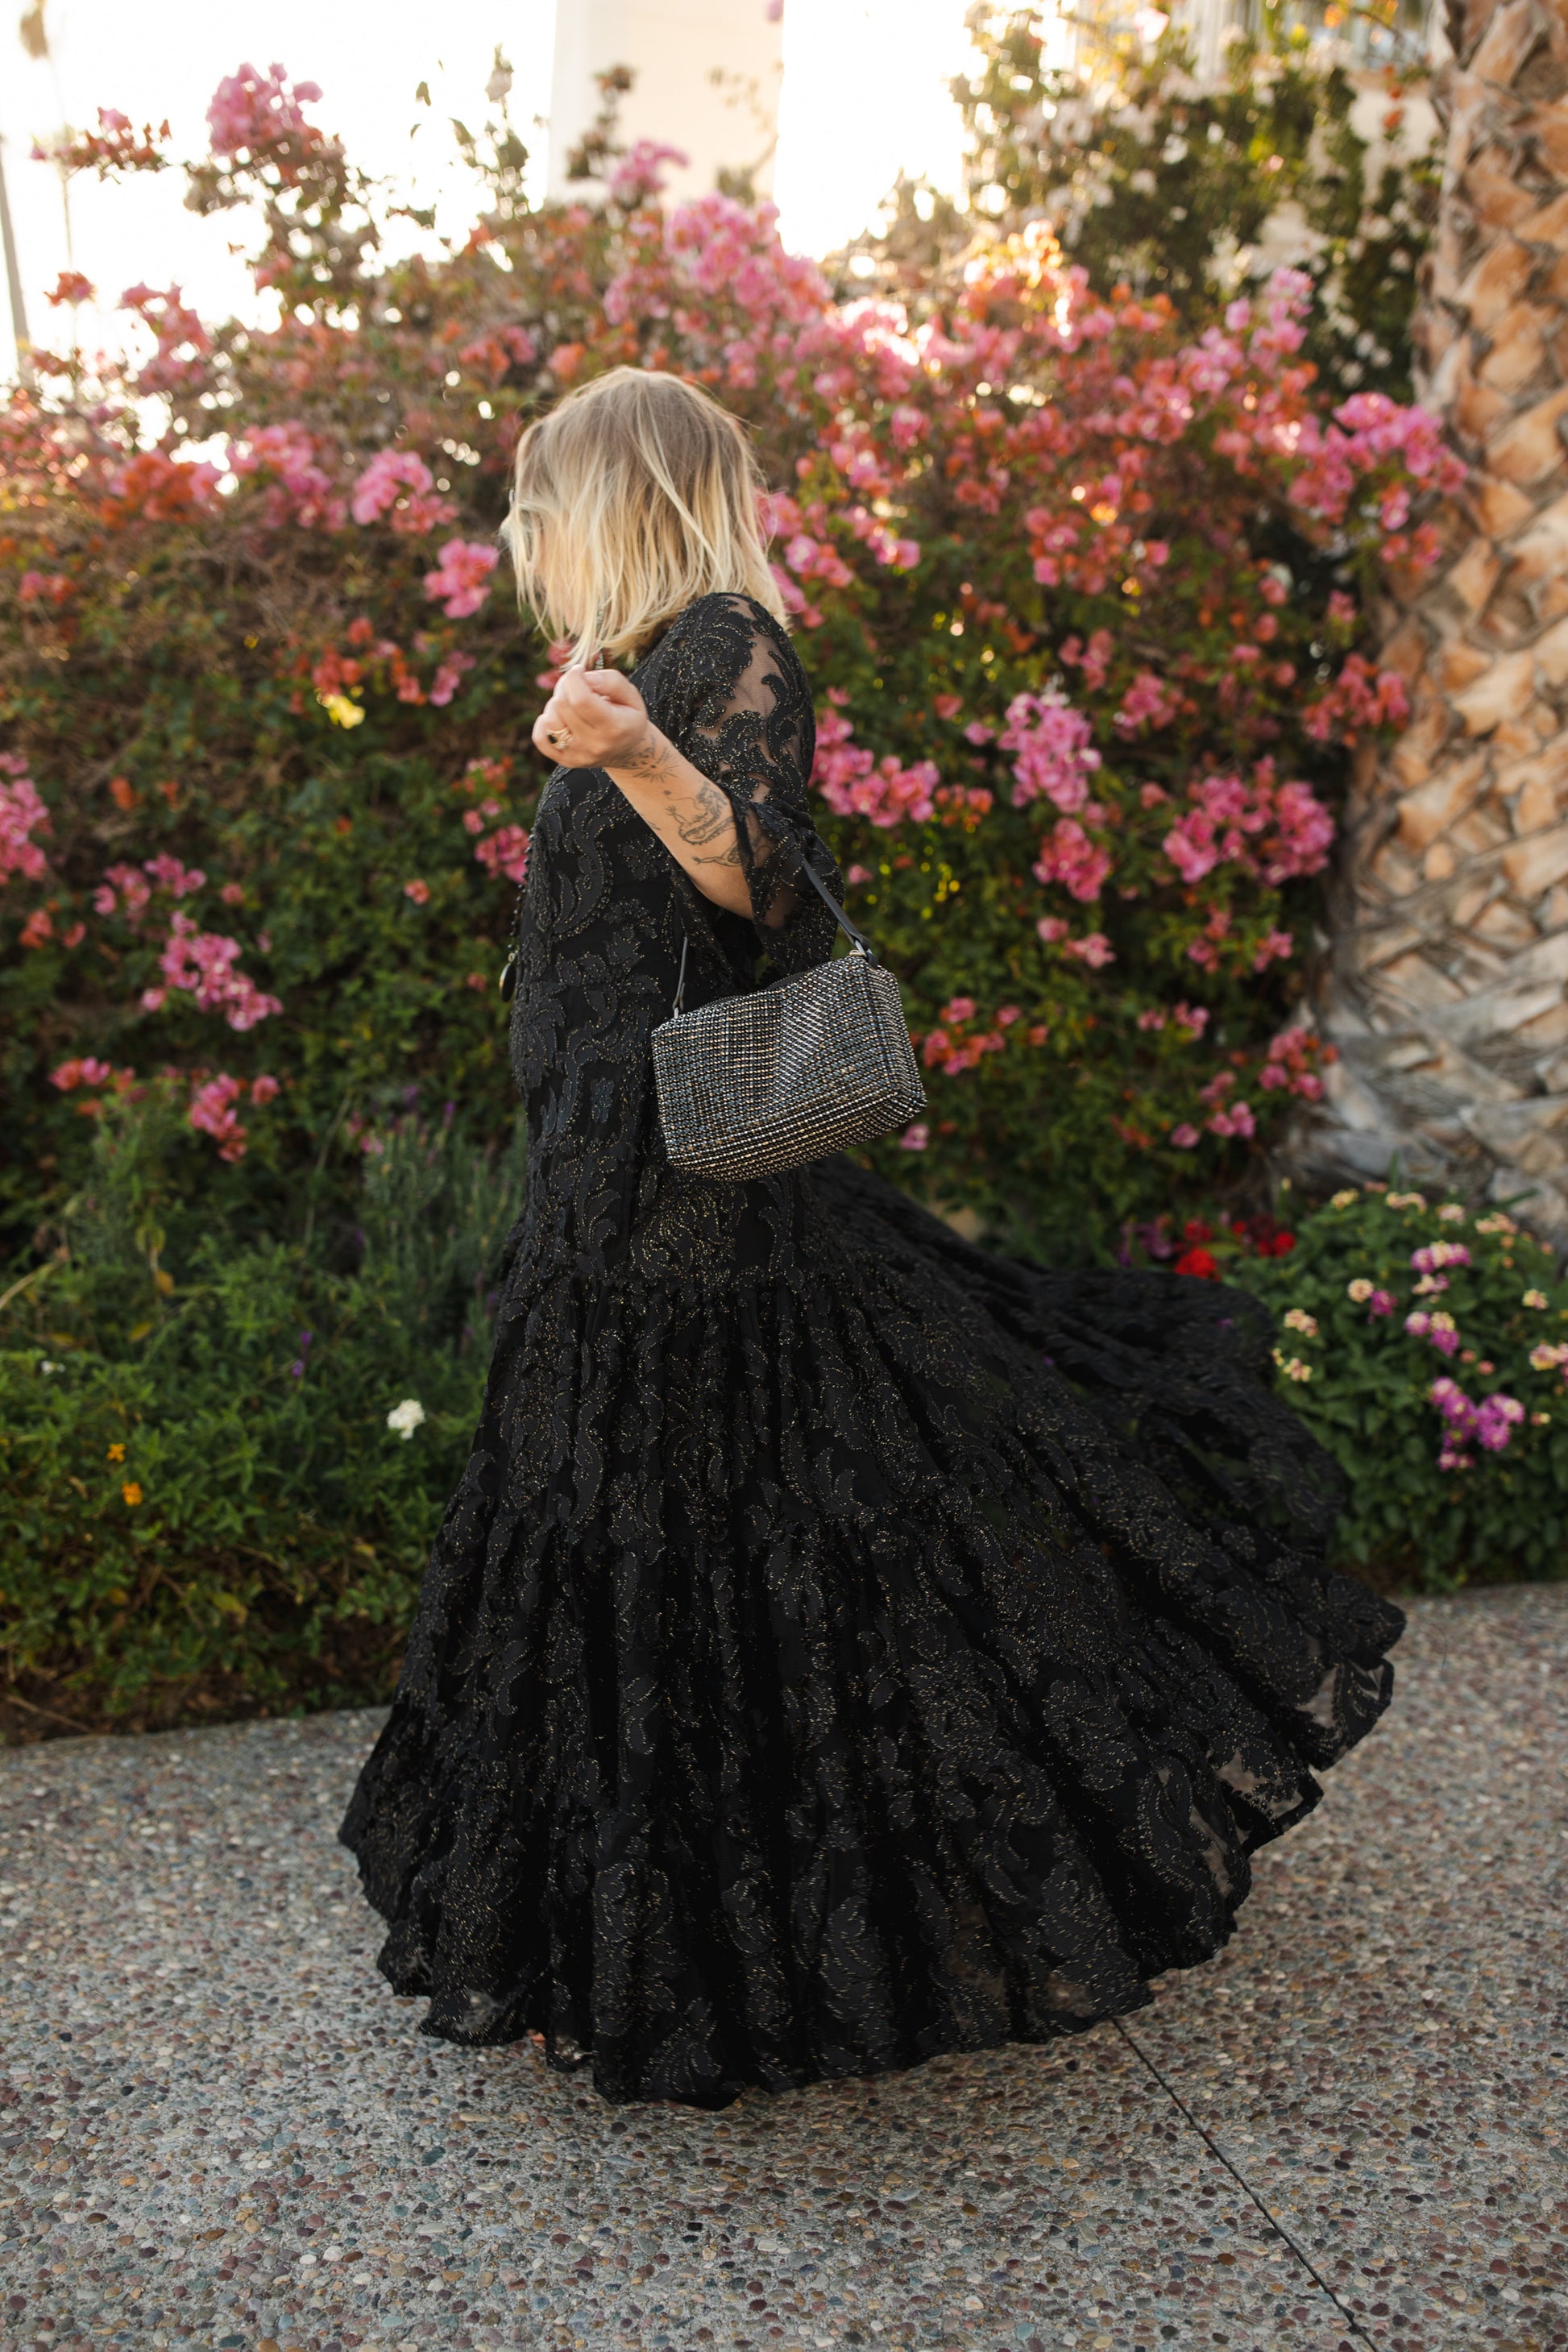 jennafer grace petite mystic lace ruffle dress 3 tiered skirt semi-sheer black lace gold metallic thread shimmery goth evening gown gothic boho bohemian hippie romantic whimsical handmade in california usa